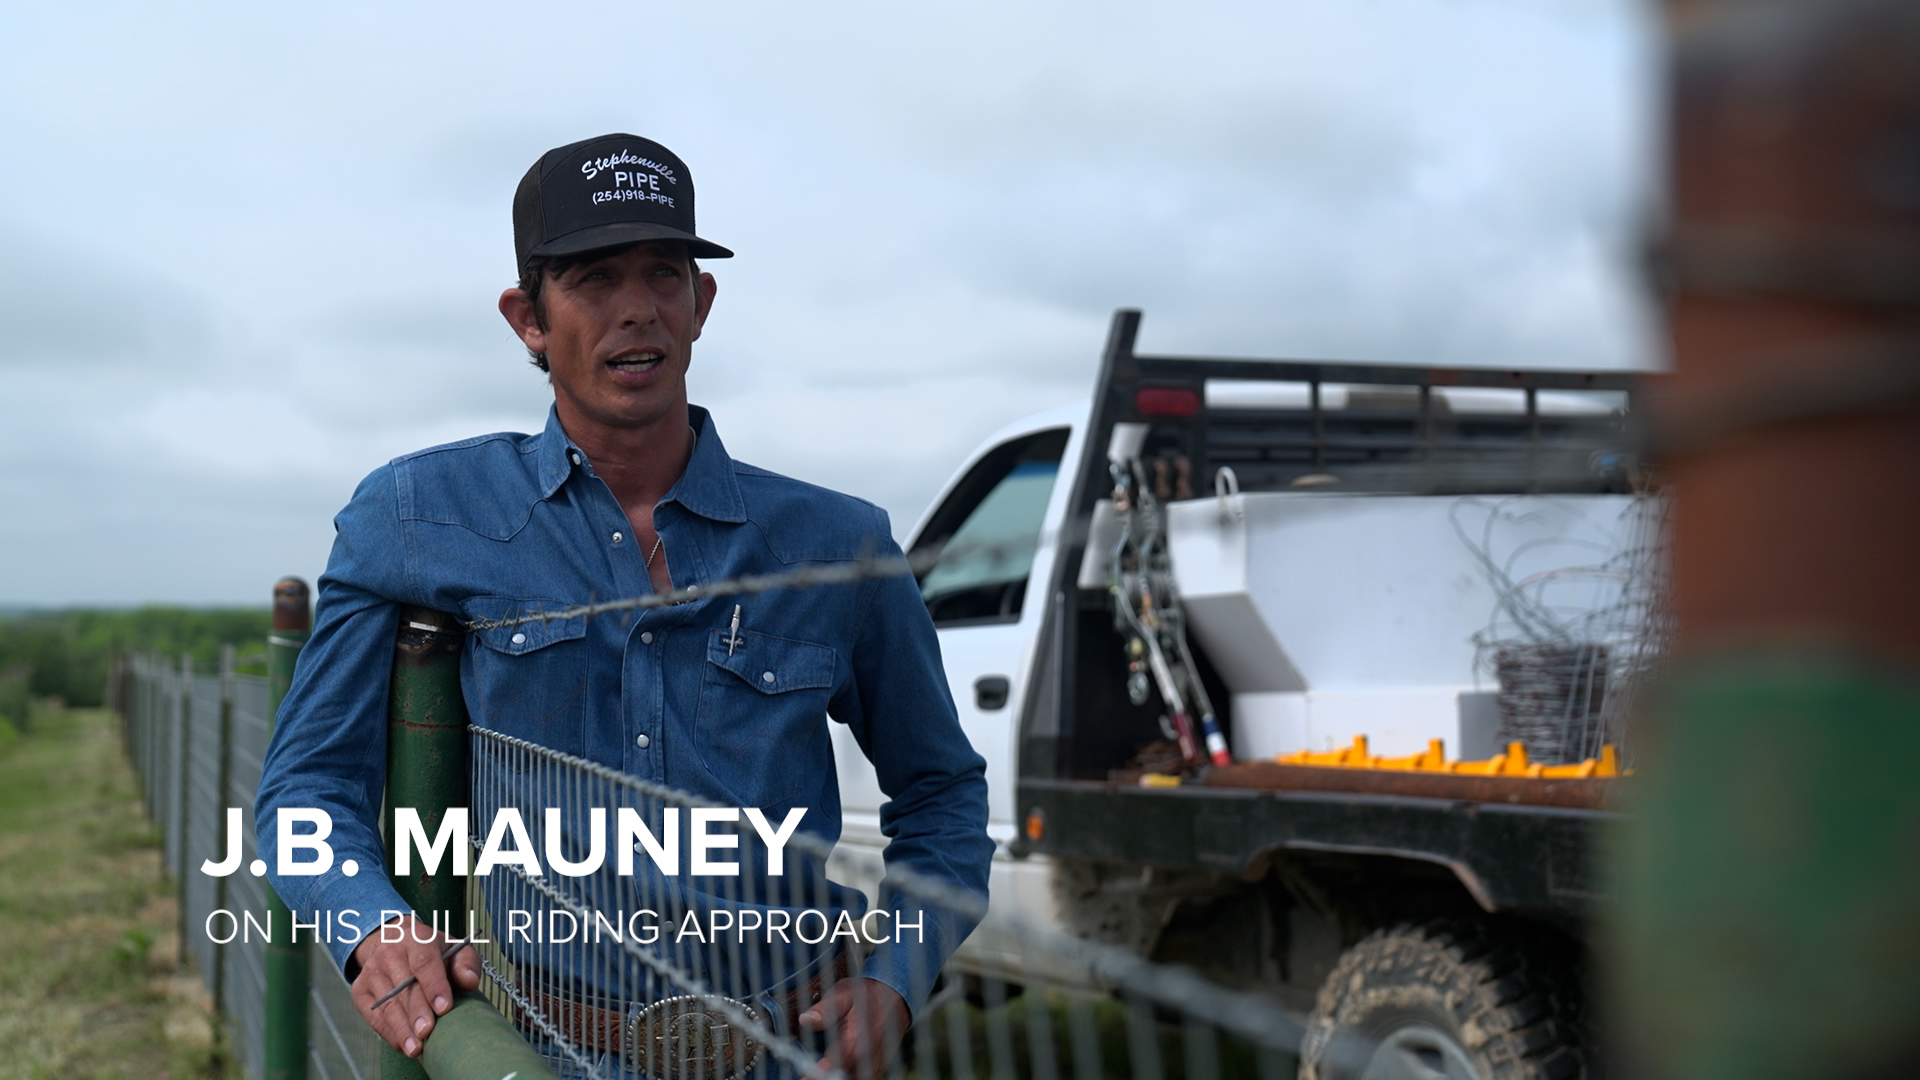 Legendary bull rider J.B. Mauney had to retire after breaking his neck. Now he's coaching. He explains his approach to riding.